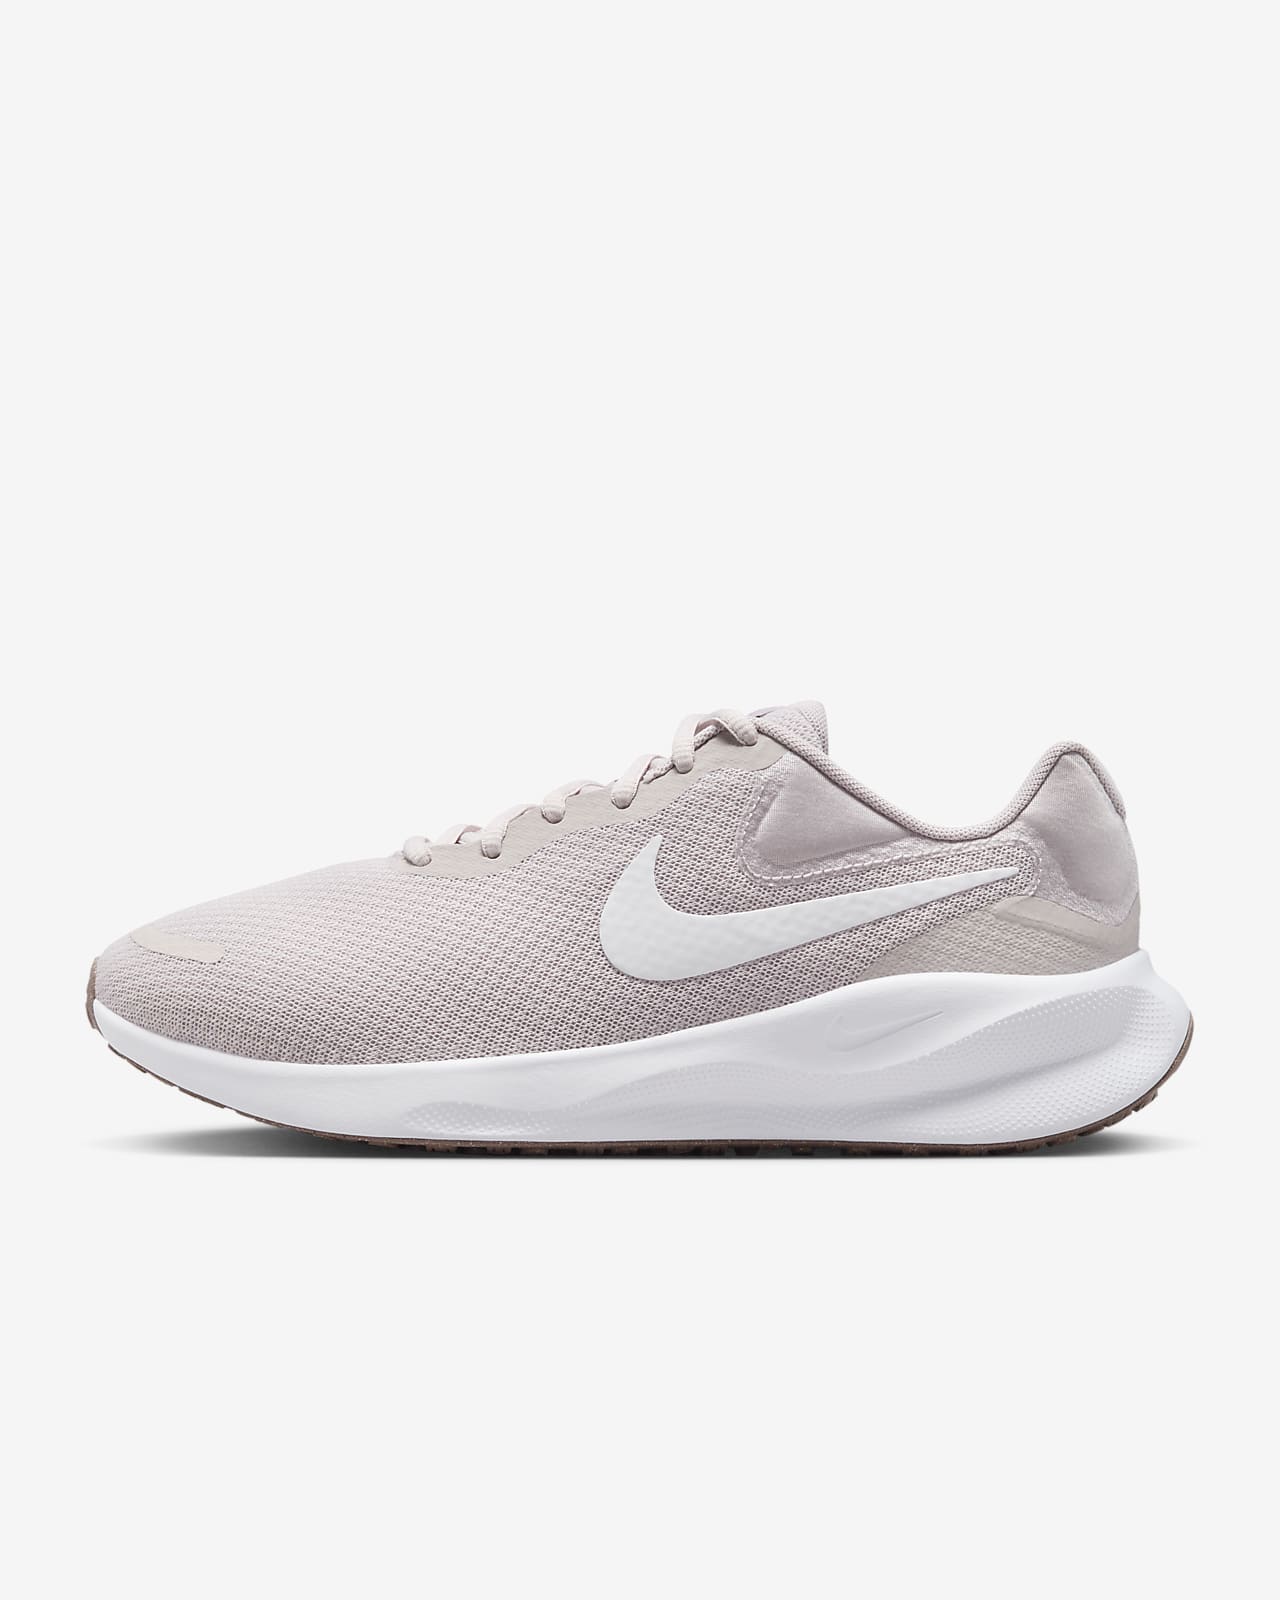 https://static.nike.com/a/images/t_PDP_1280_v1/f_auto,q_auto:eco/bd7f5829-37d0-4ed8-a7e0-546942dfd73c/revolution-7-womens-road-running-shoes-extra-wide-bt34Qq.png